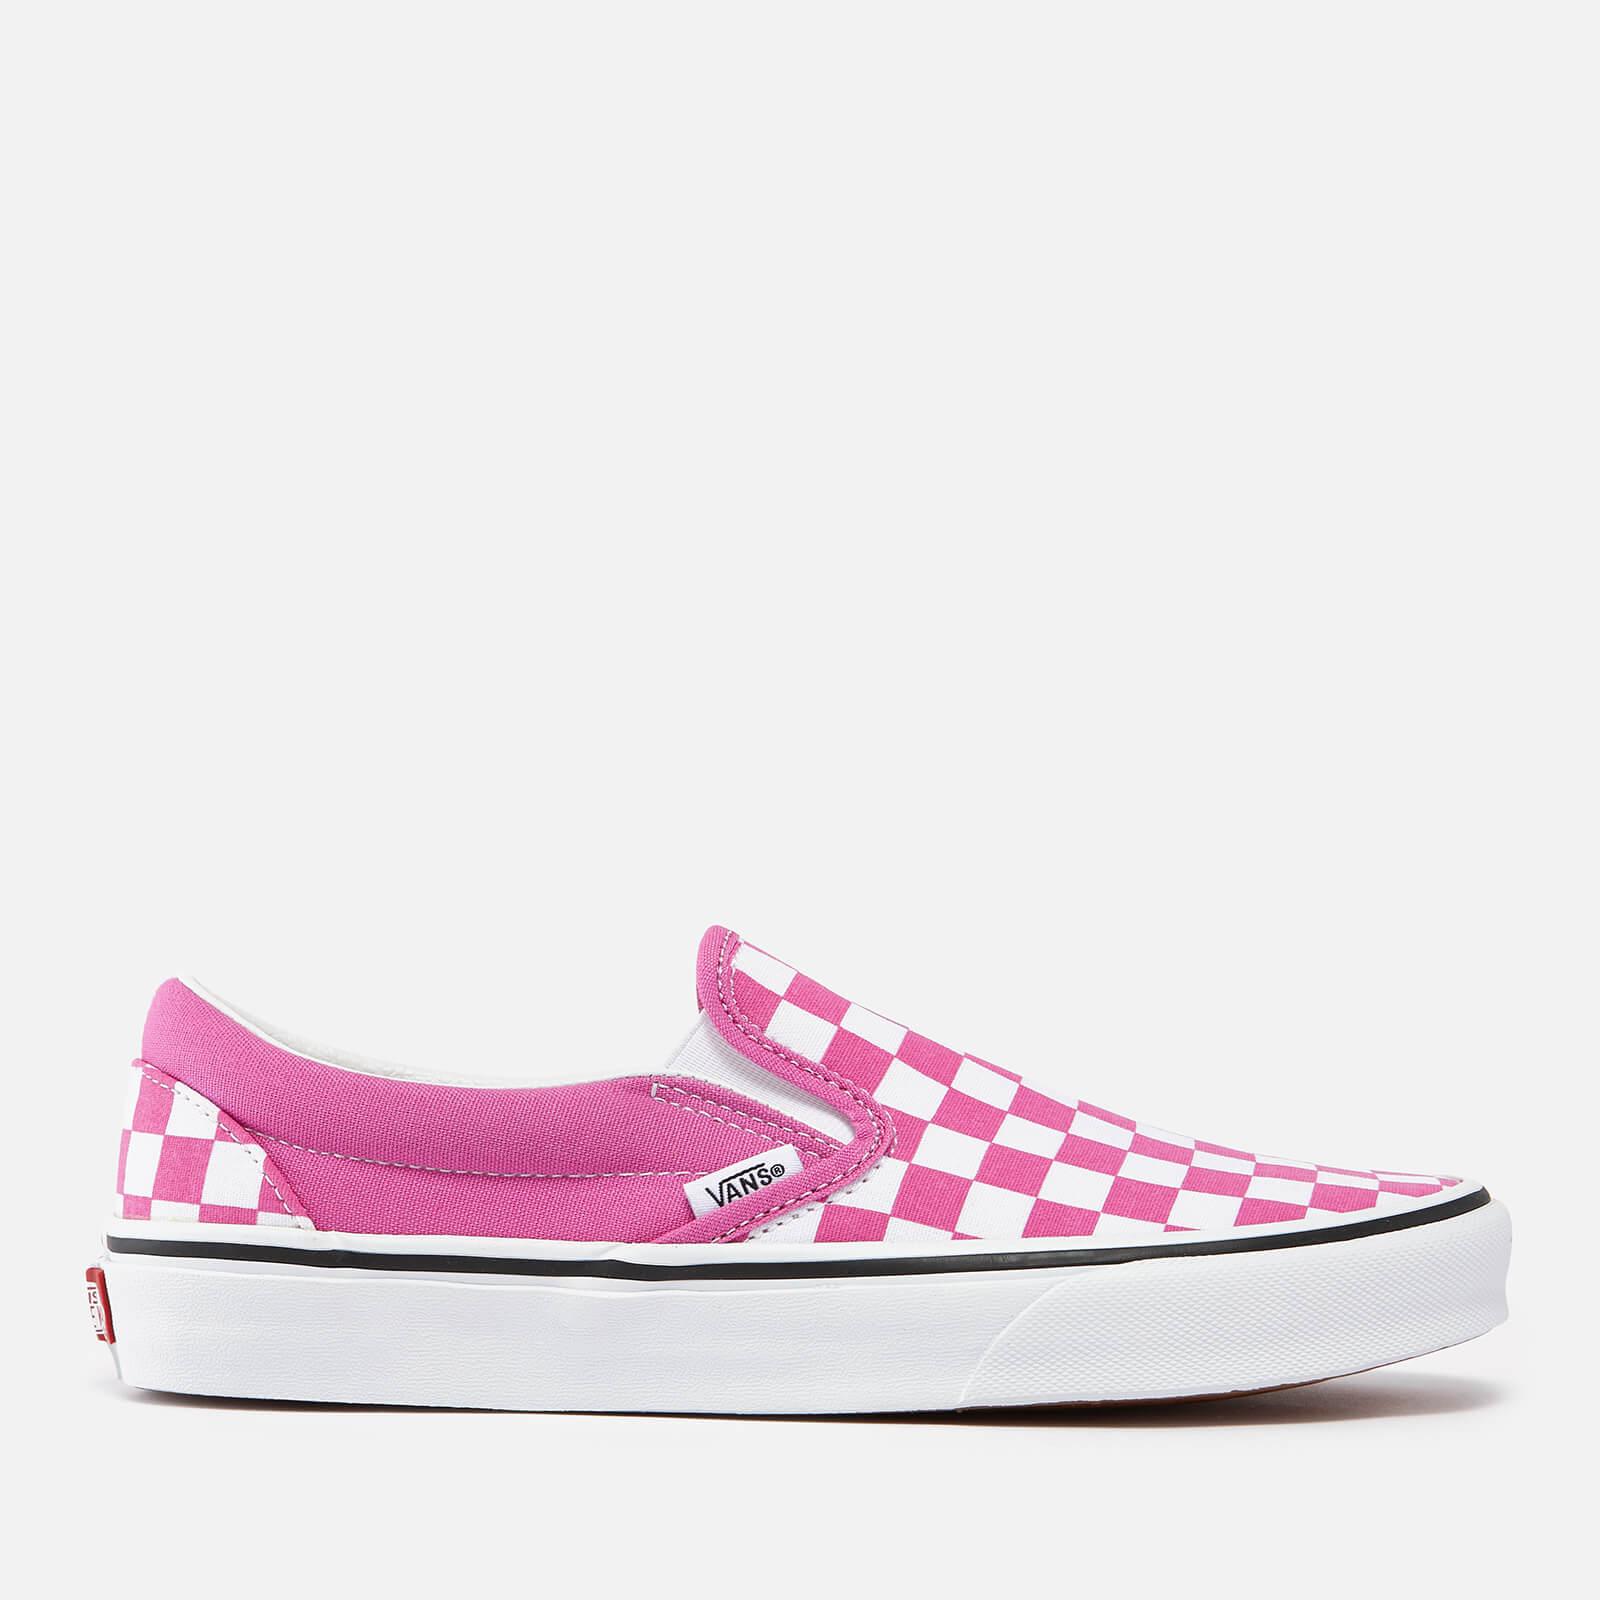 Vans Checkerboard Classic Slip-on Trainers in Pink | Lyst